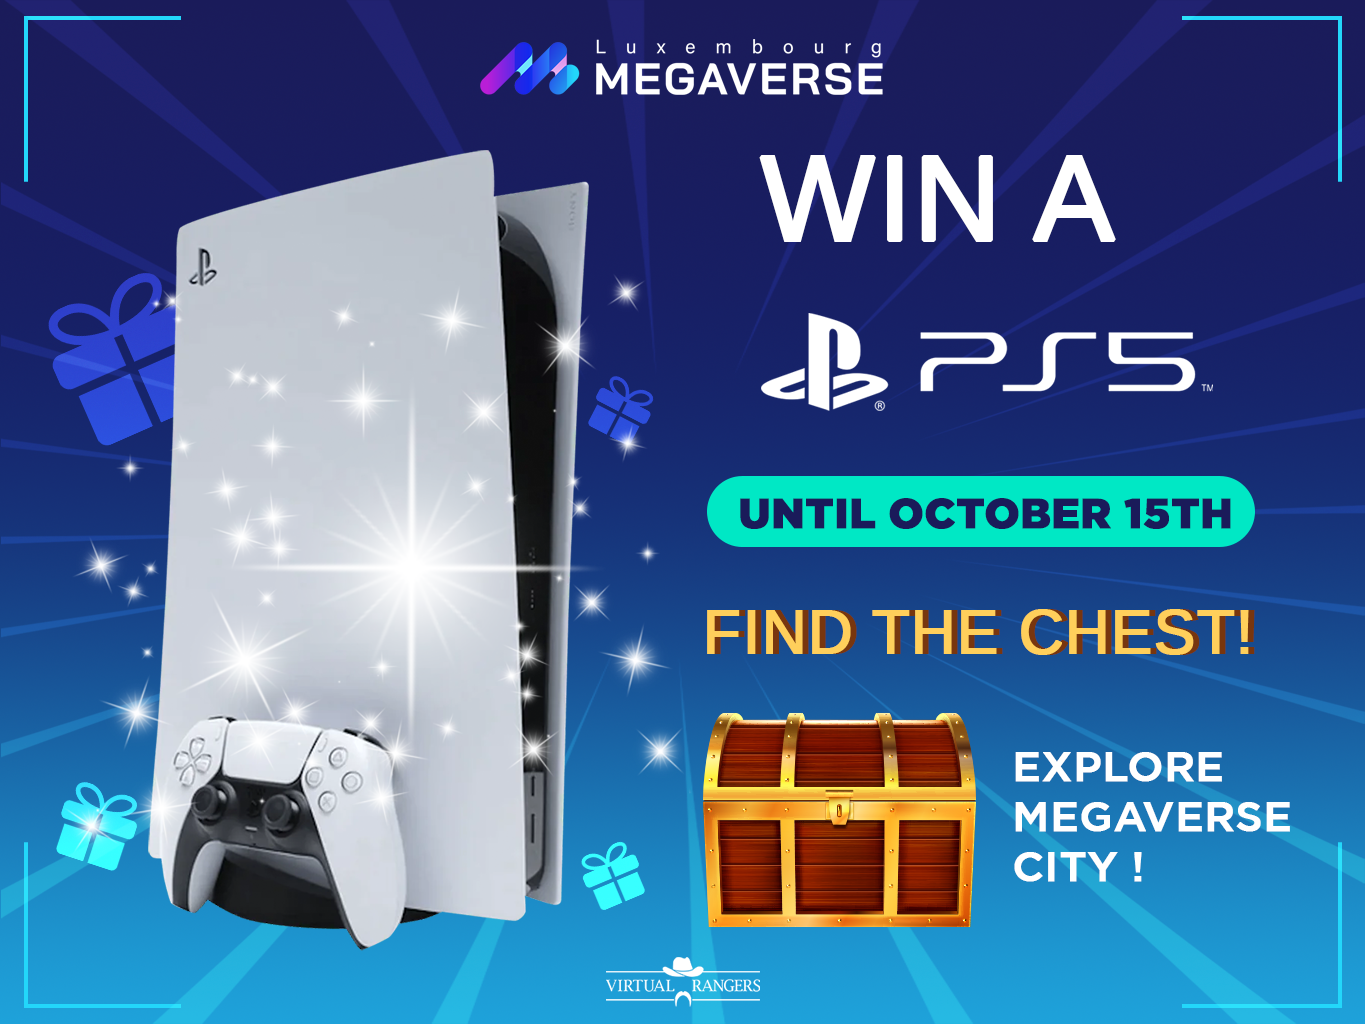 Win a PS5 in the Megaverse